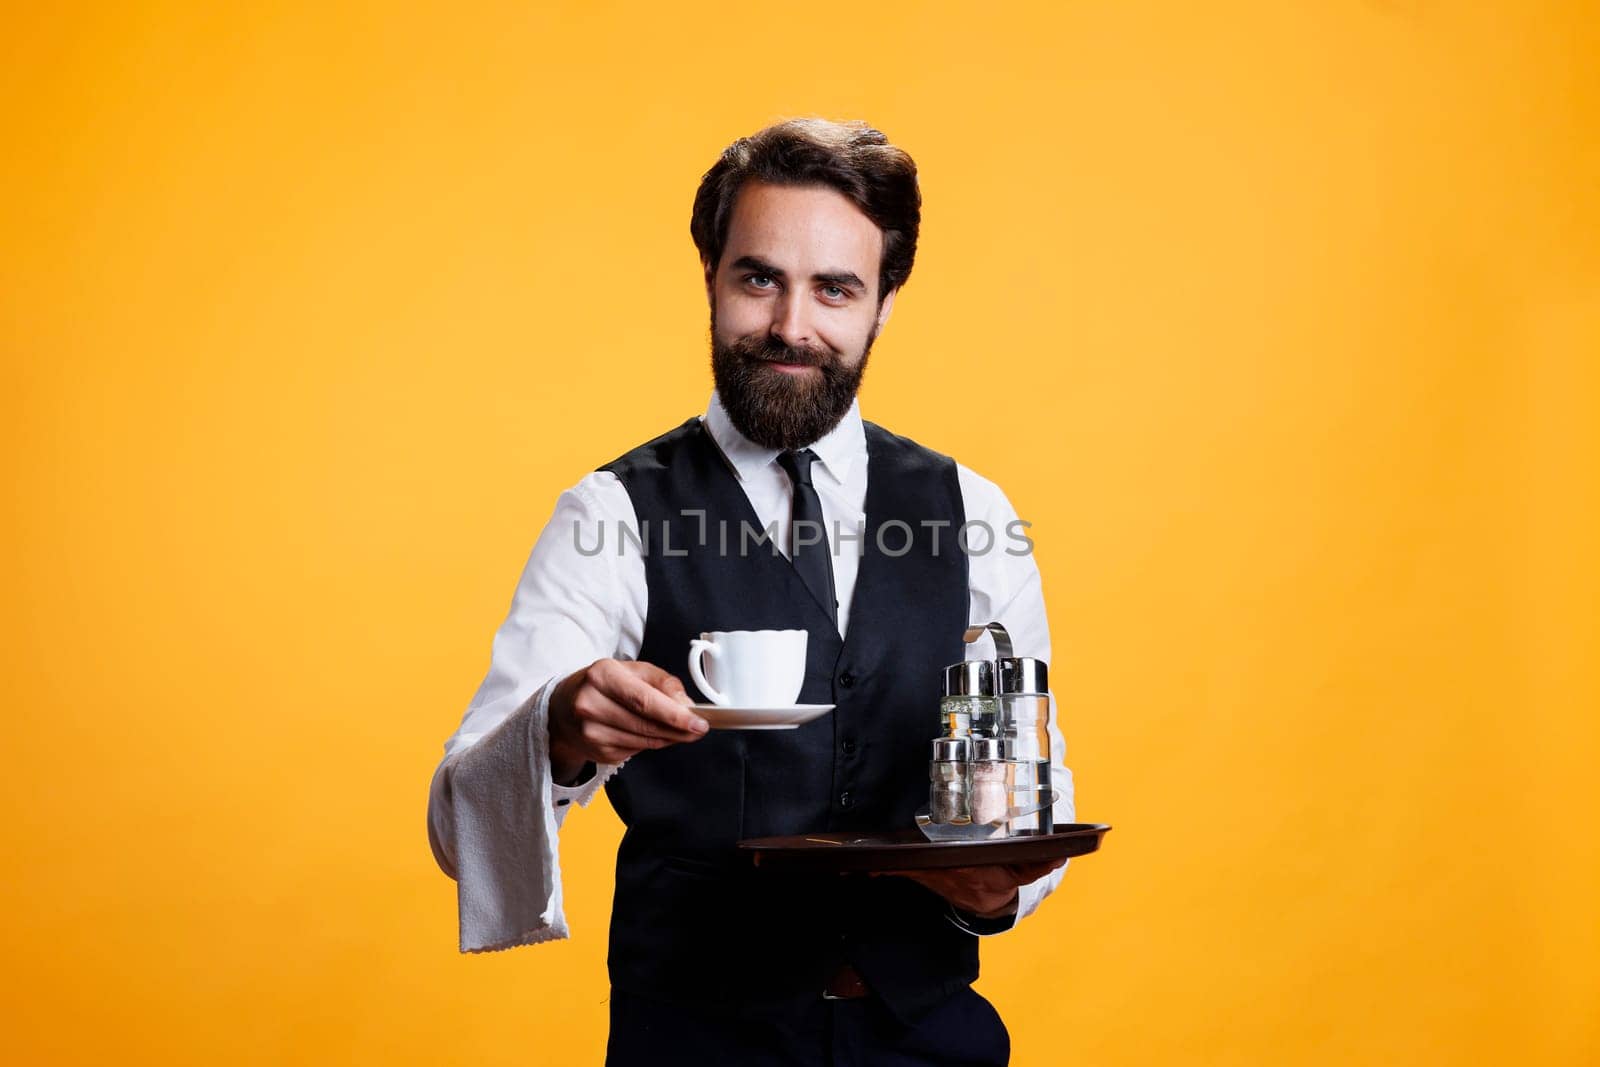 Elegant butler giving coffee cup to clients, pretending to serve people while he holds platter with salt and pepper. Professional expert waiter with suit and tie carrying tray, catering industry.